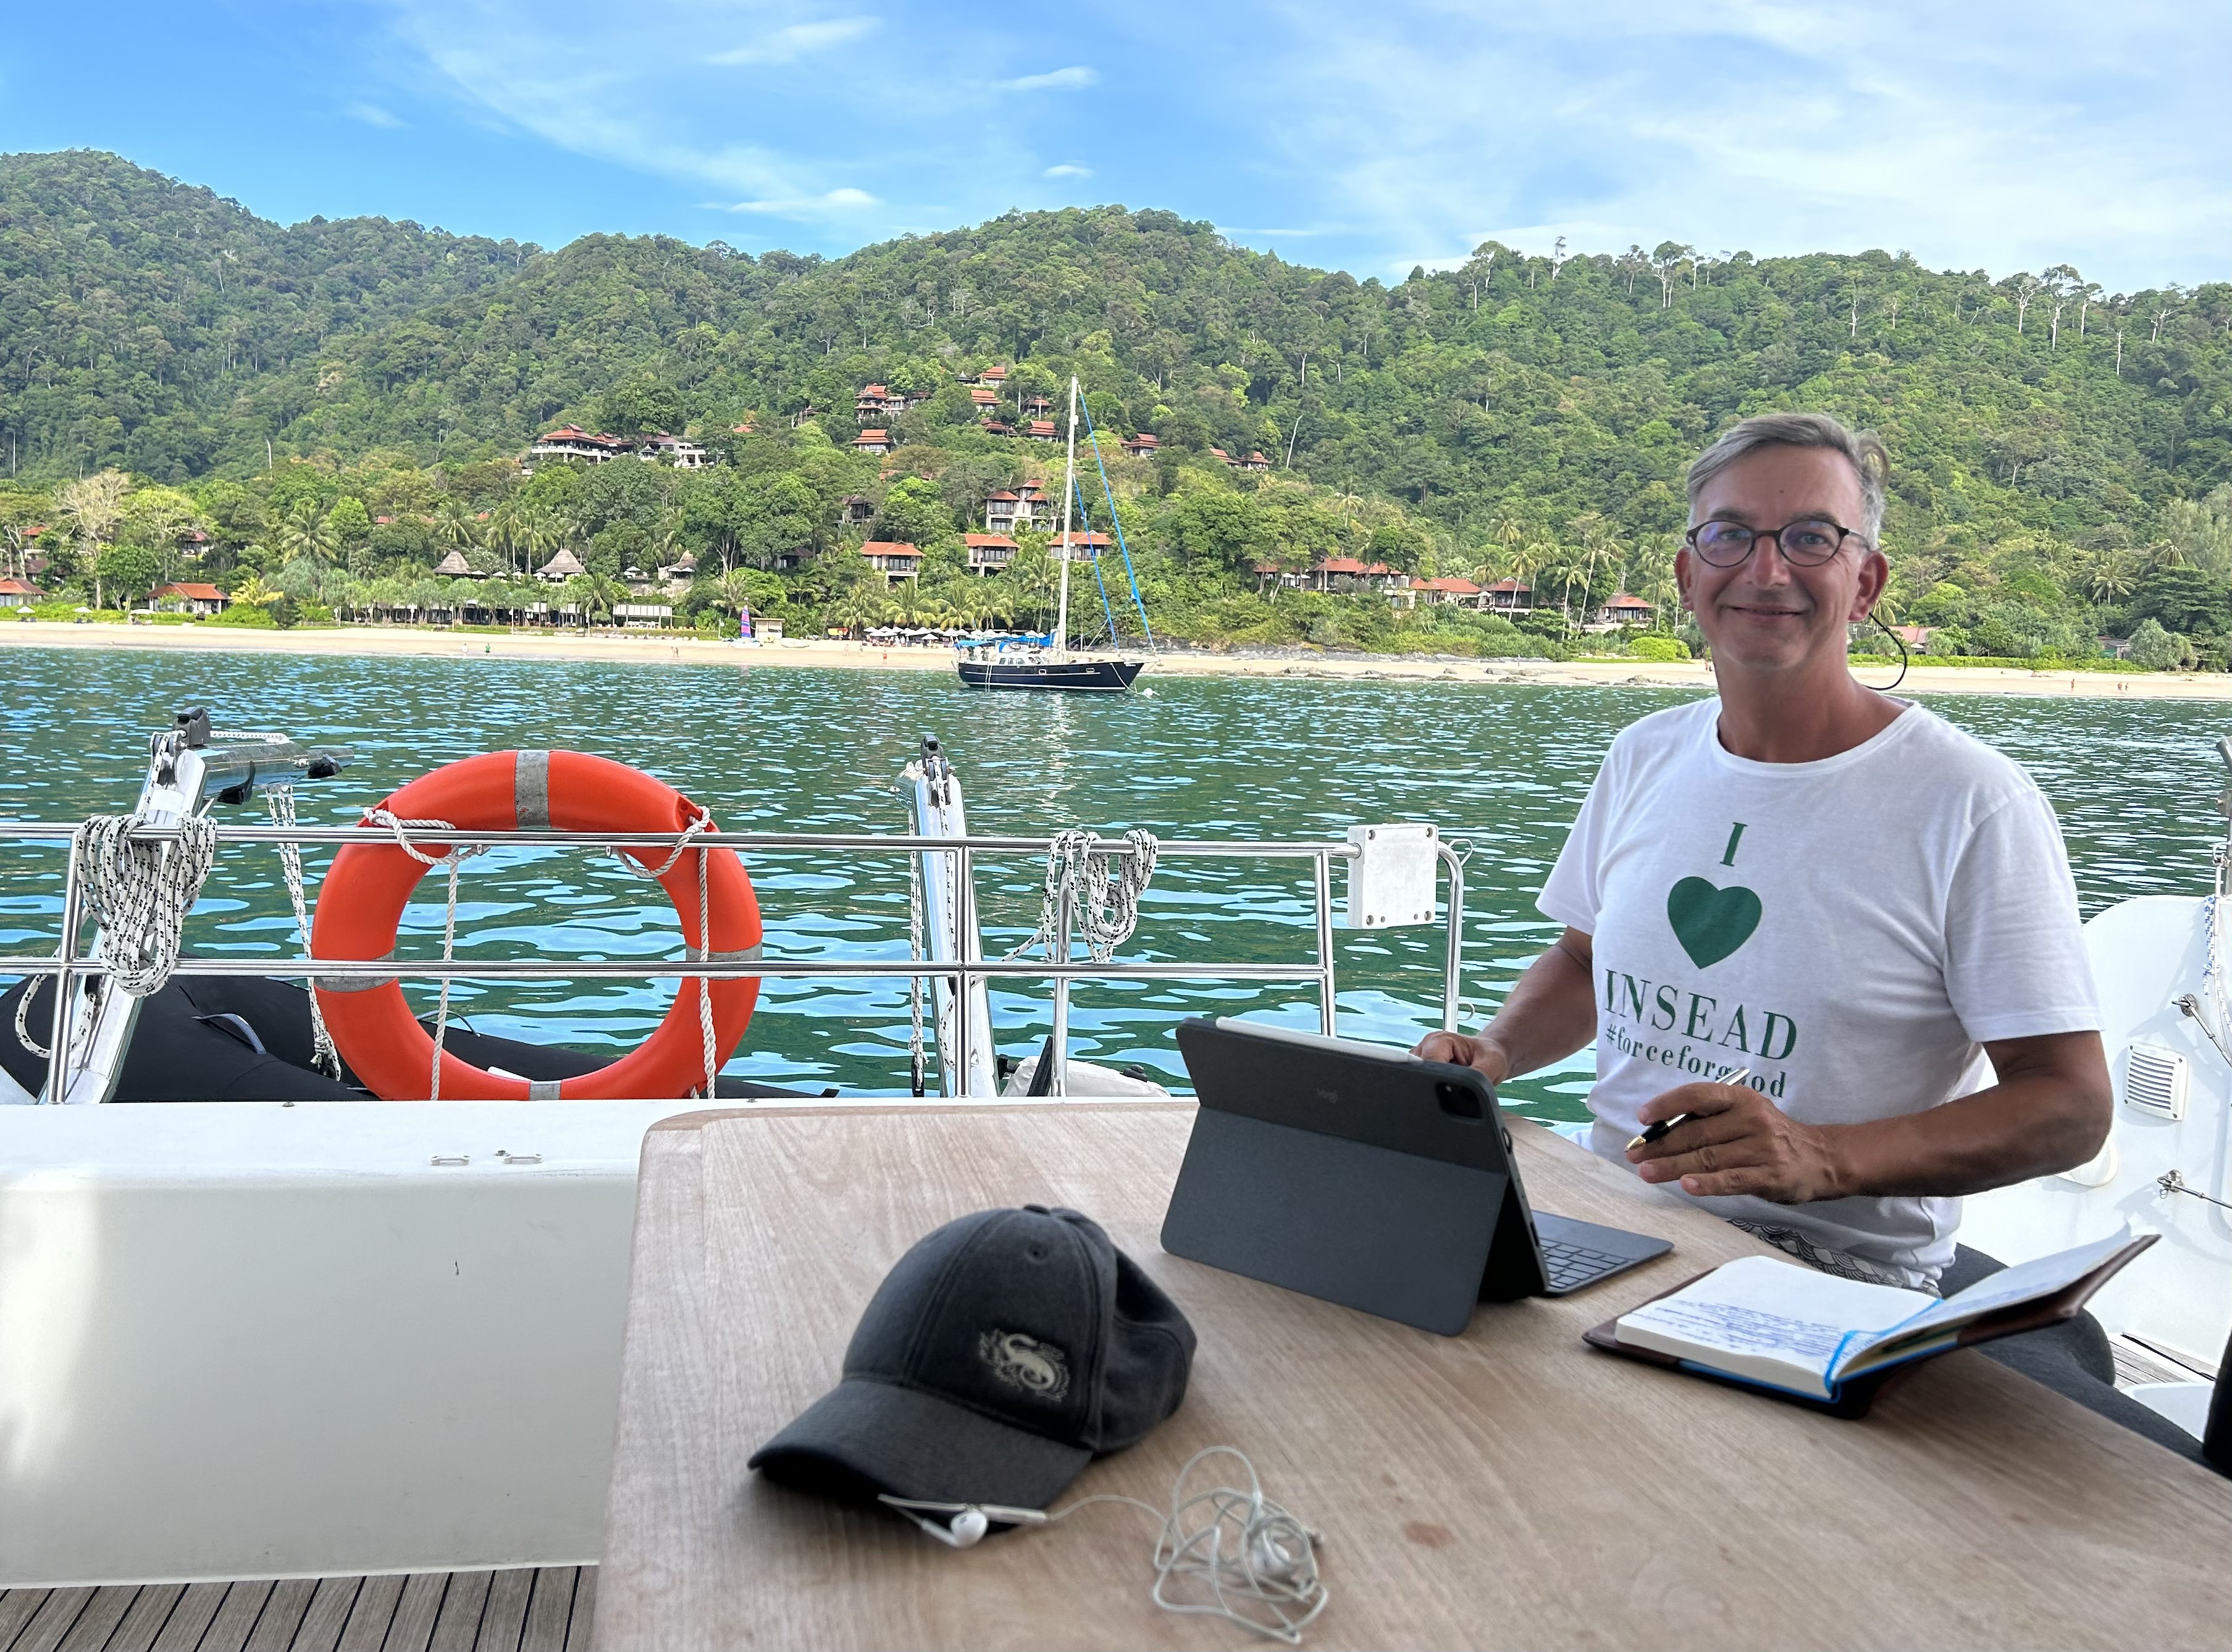 A man on a boat uses his laptop and poses for the camera; there is a picturesque island in the background.